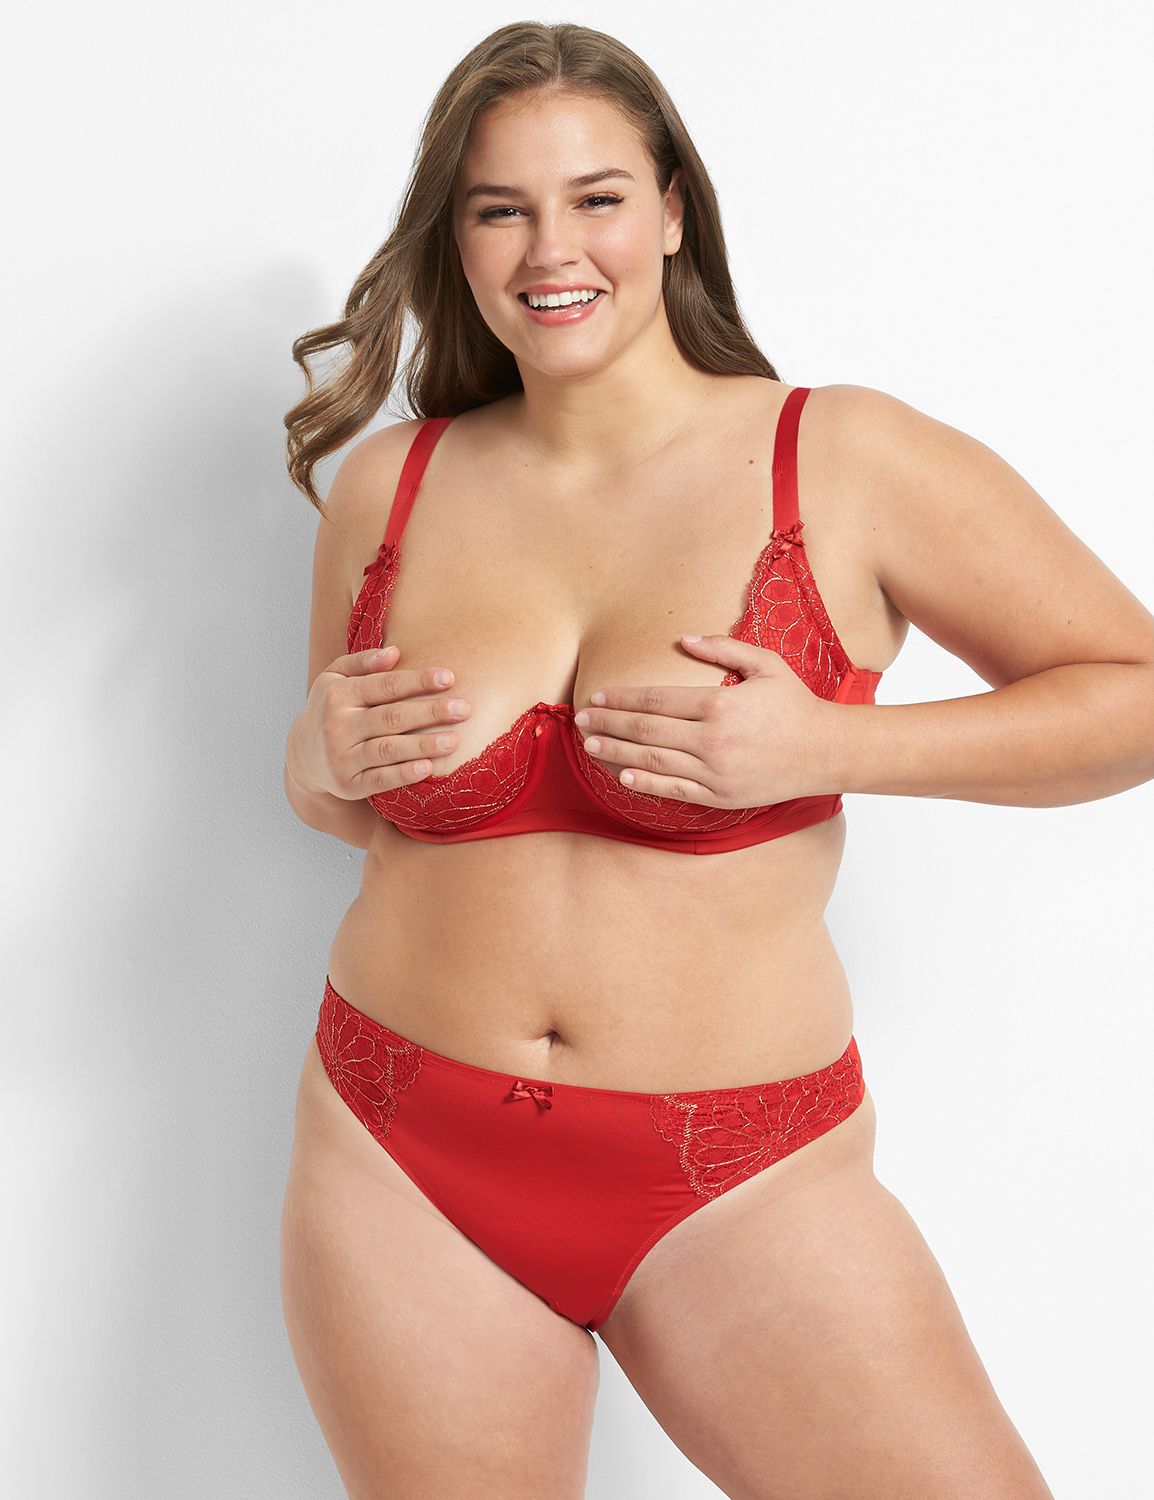 Cacique, Intimates & Sleepwear, Cacique Lane Bryant Quarter Cup Bra 4ddd  Cradle And Front Strap Lace Black Red